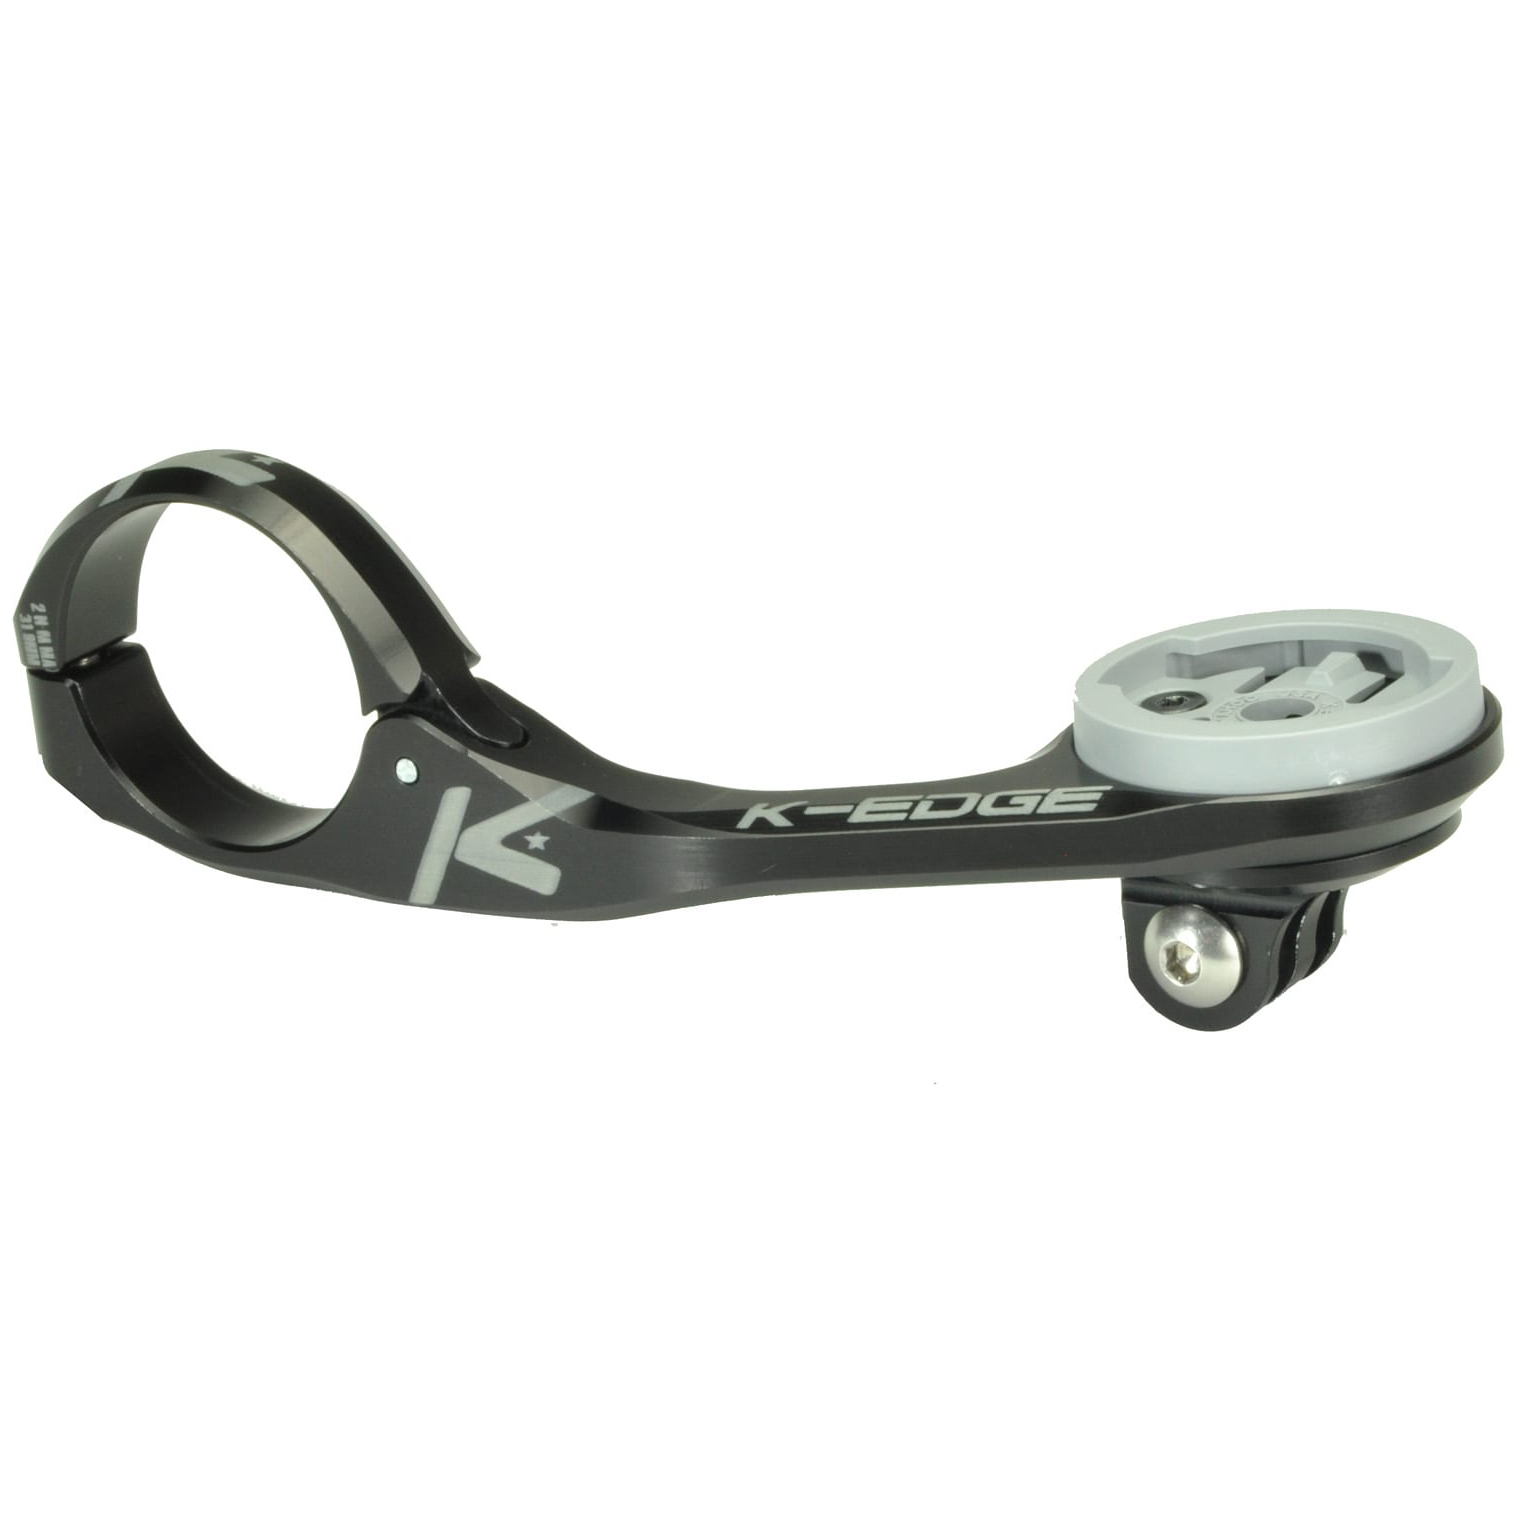 Picture of K-Edge Wahoo MAX XL Combo Mount - 31.8mm